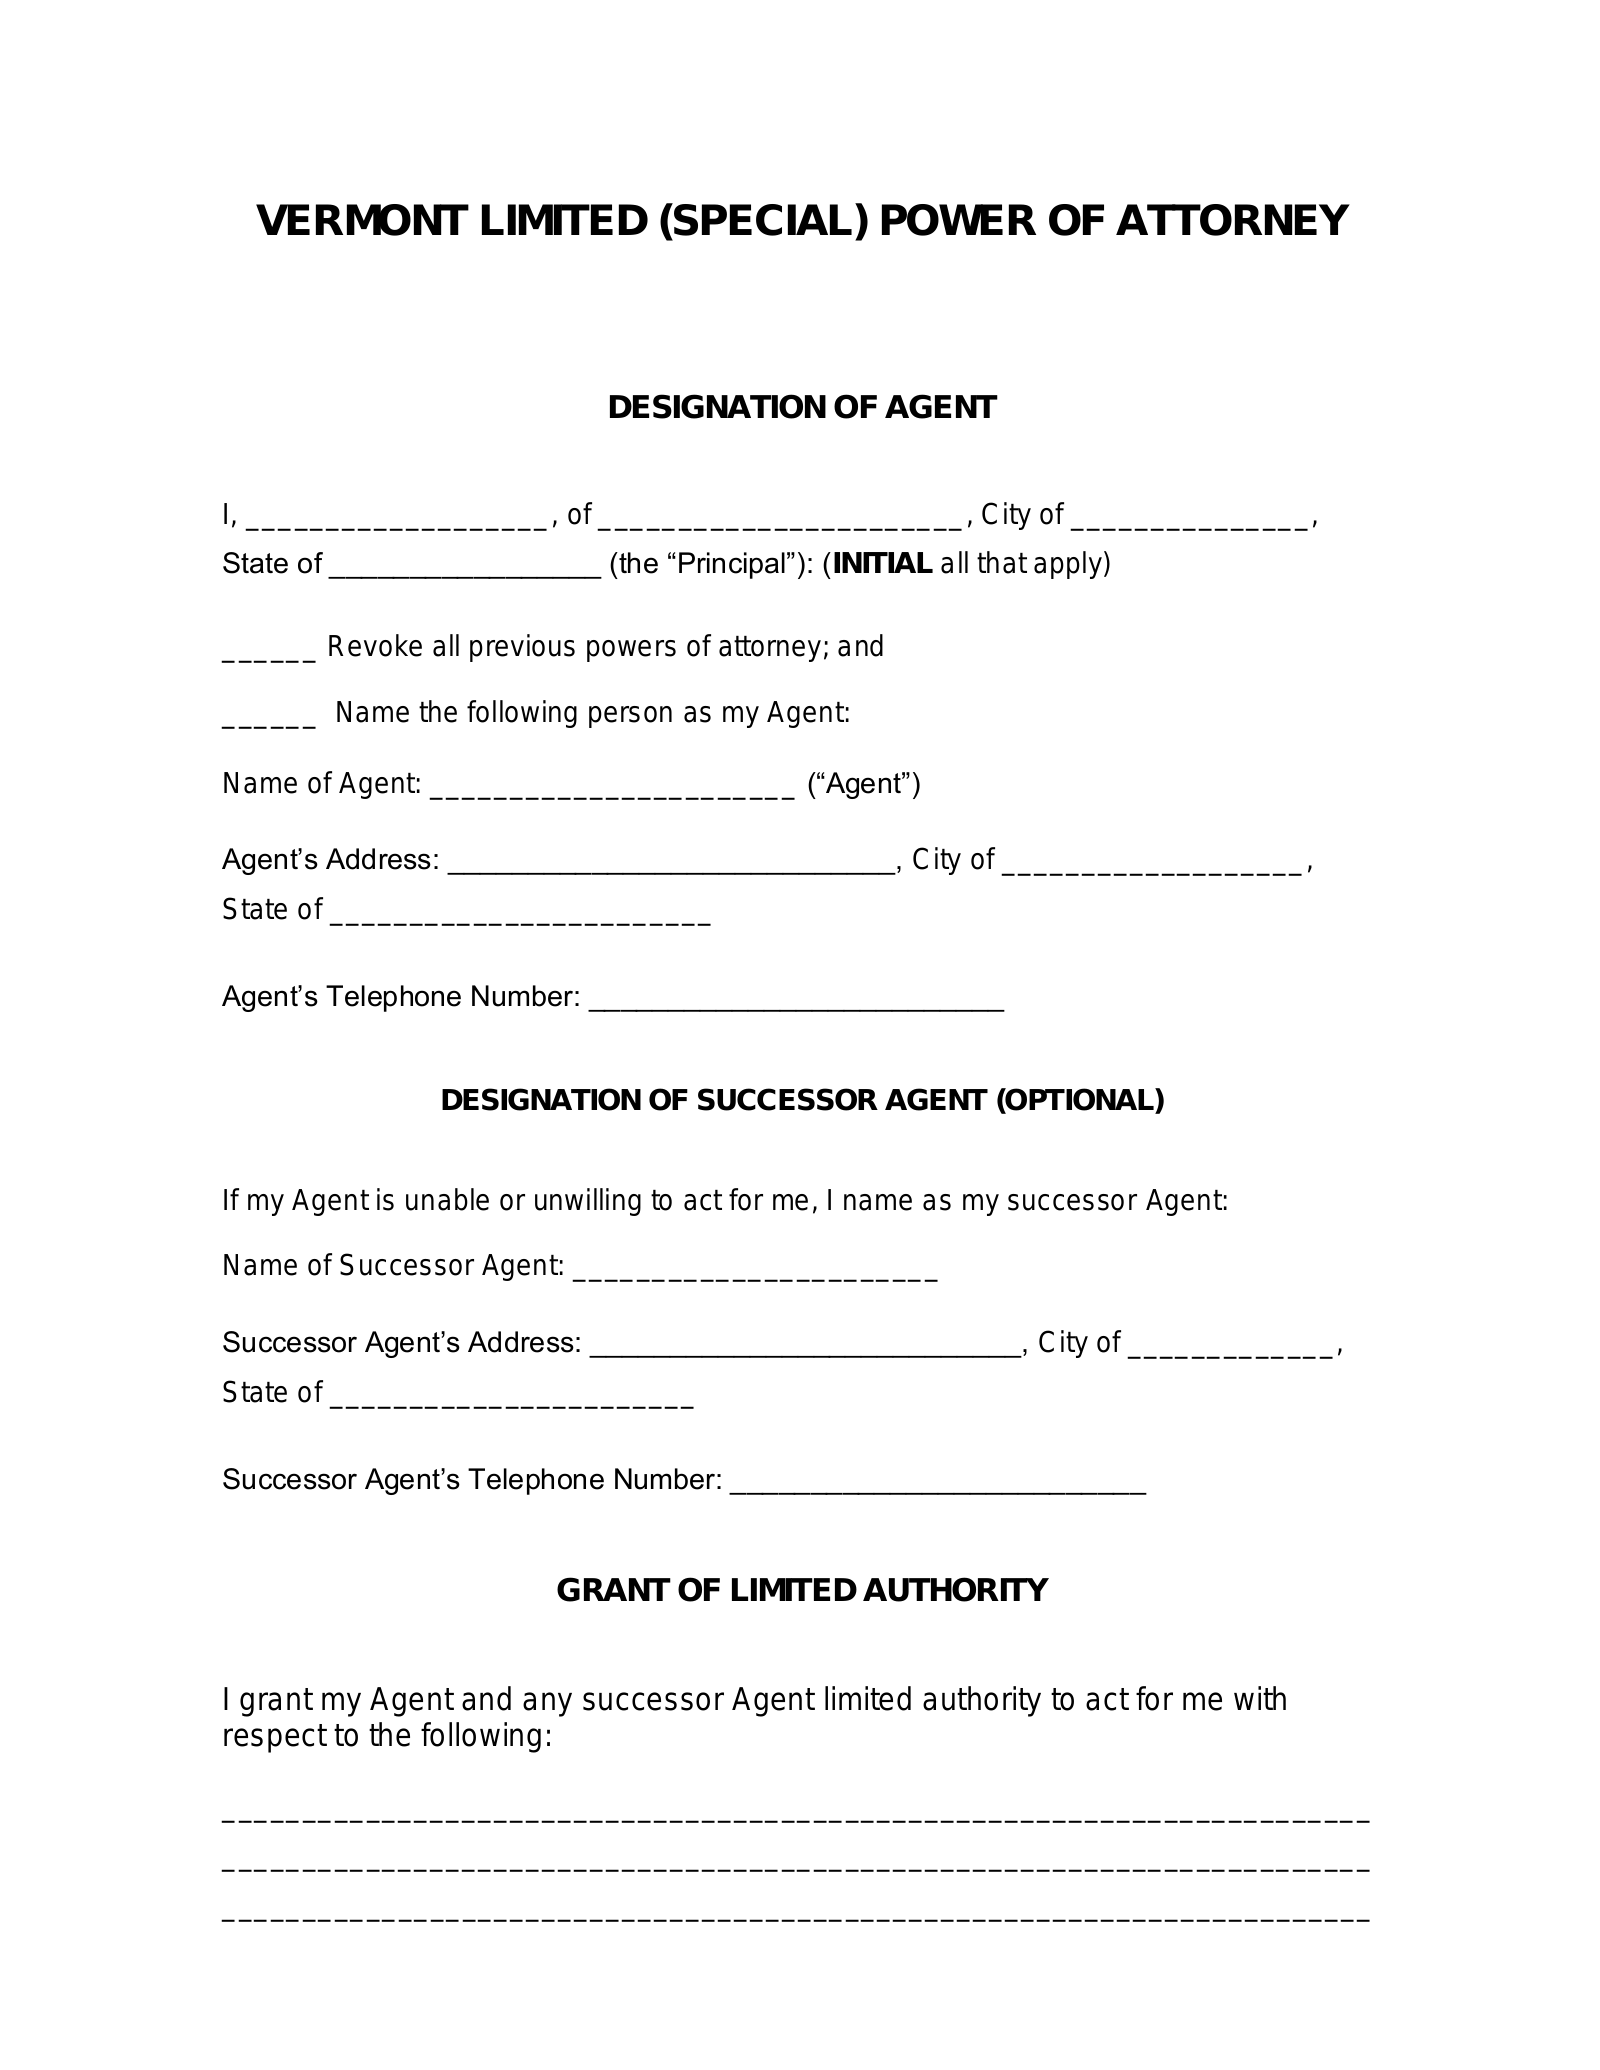 Vermont Limited Power of Attorney Form